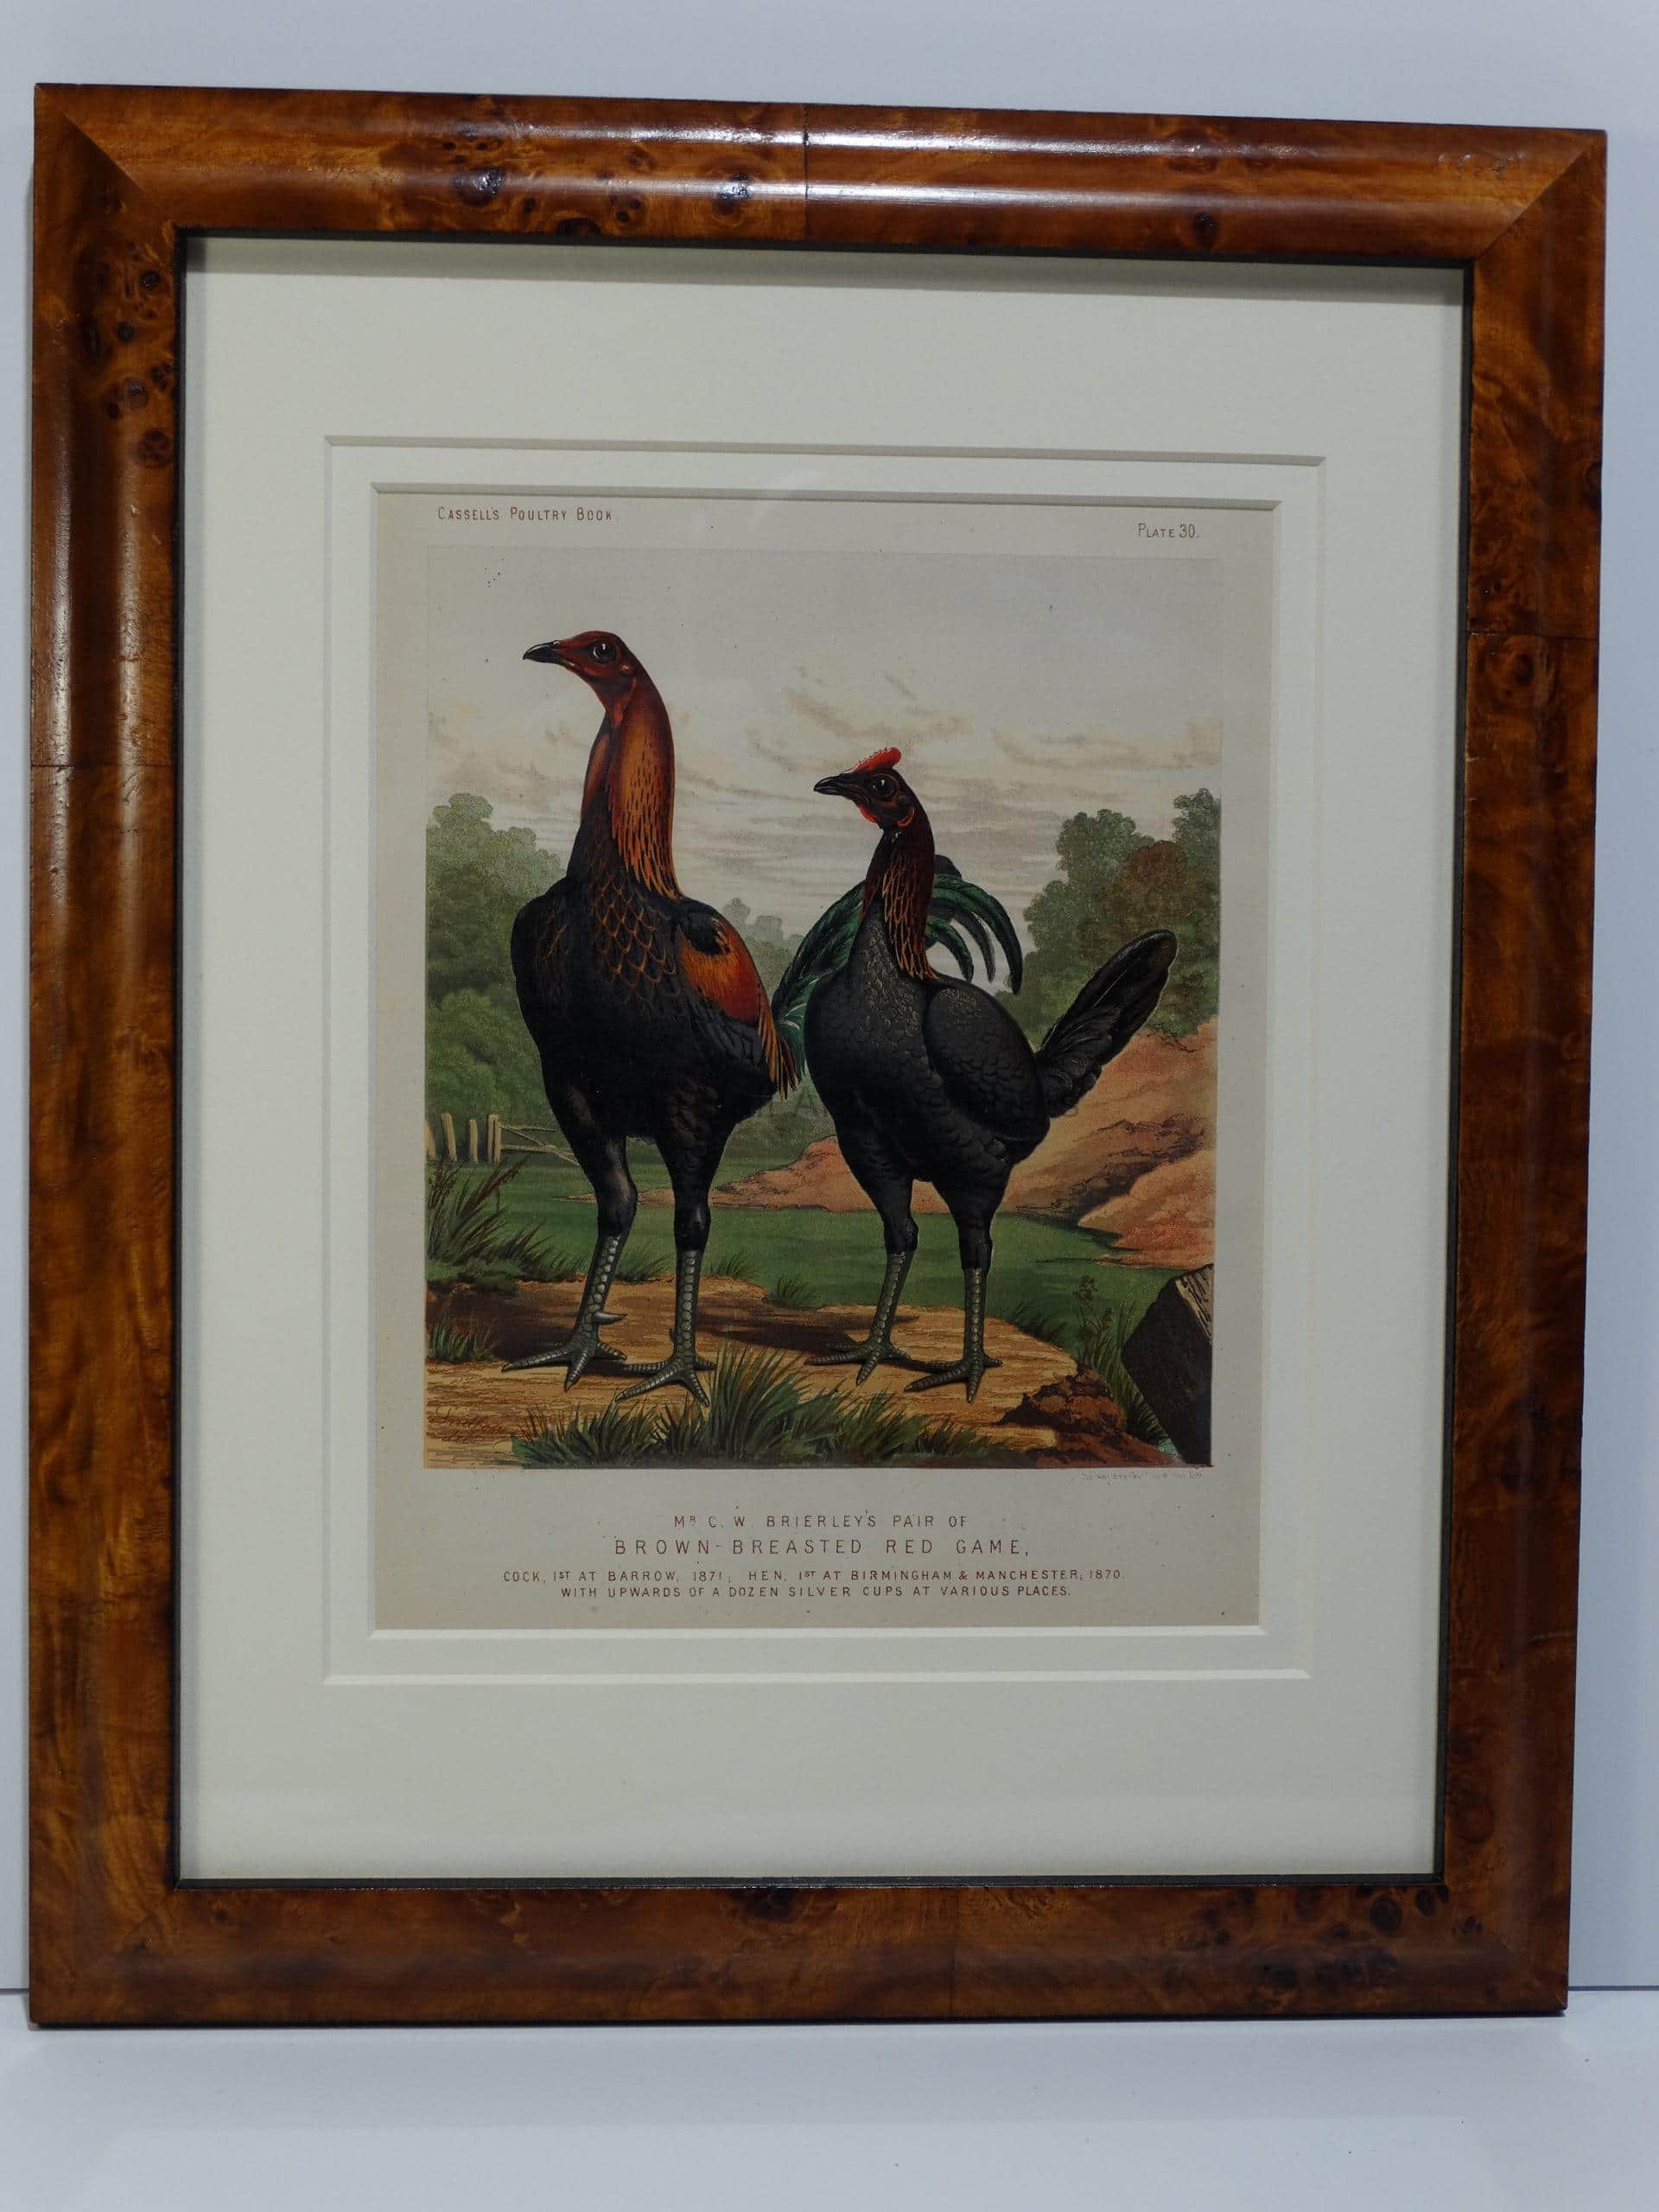 A set of three framed antique lithographs of chickens roosters., our game-henny sourced from Cassell's Poultry Book, c.1885, framed in beautiful fruitwood burl.